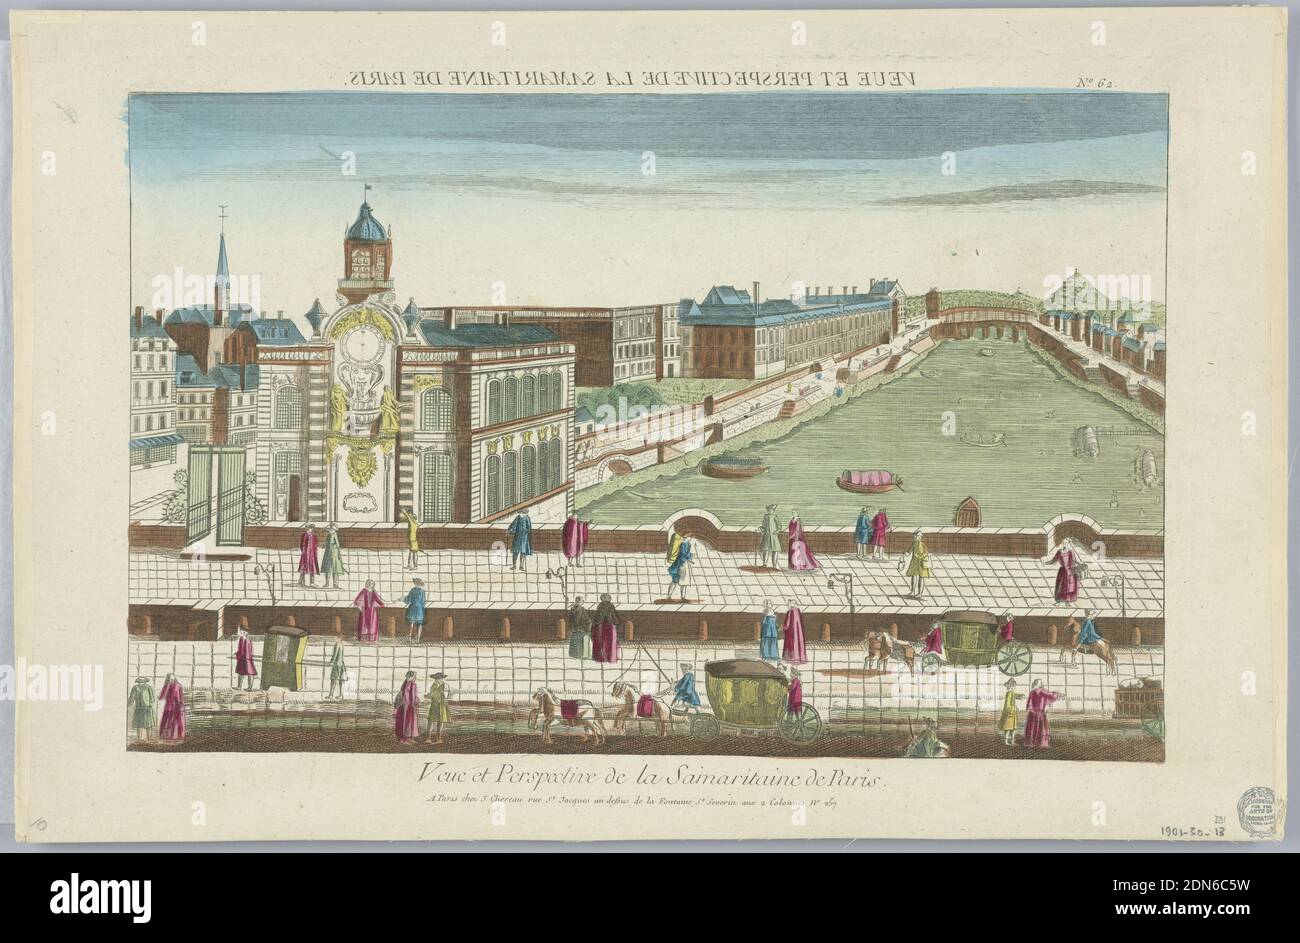 Peep-show, Veue et Perspective de la Samaritaine de Paris, No. 62, Engraving in ink with washes of watercolor on paper, mounted on scrapbook page, Peep-show print, France, ca. 1750, Print Stock Photo